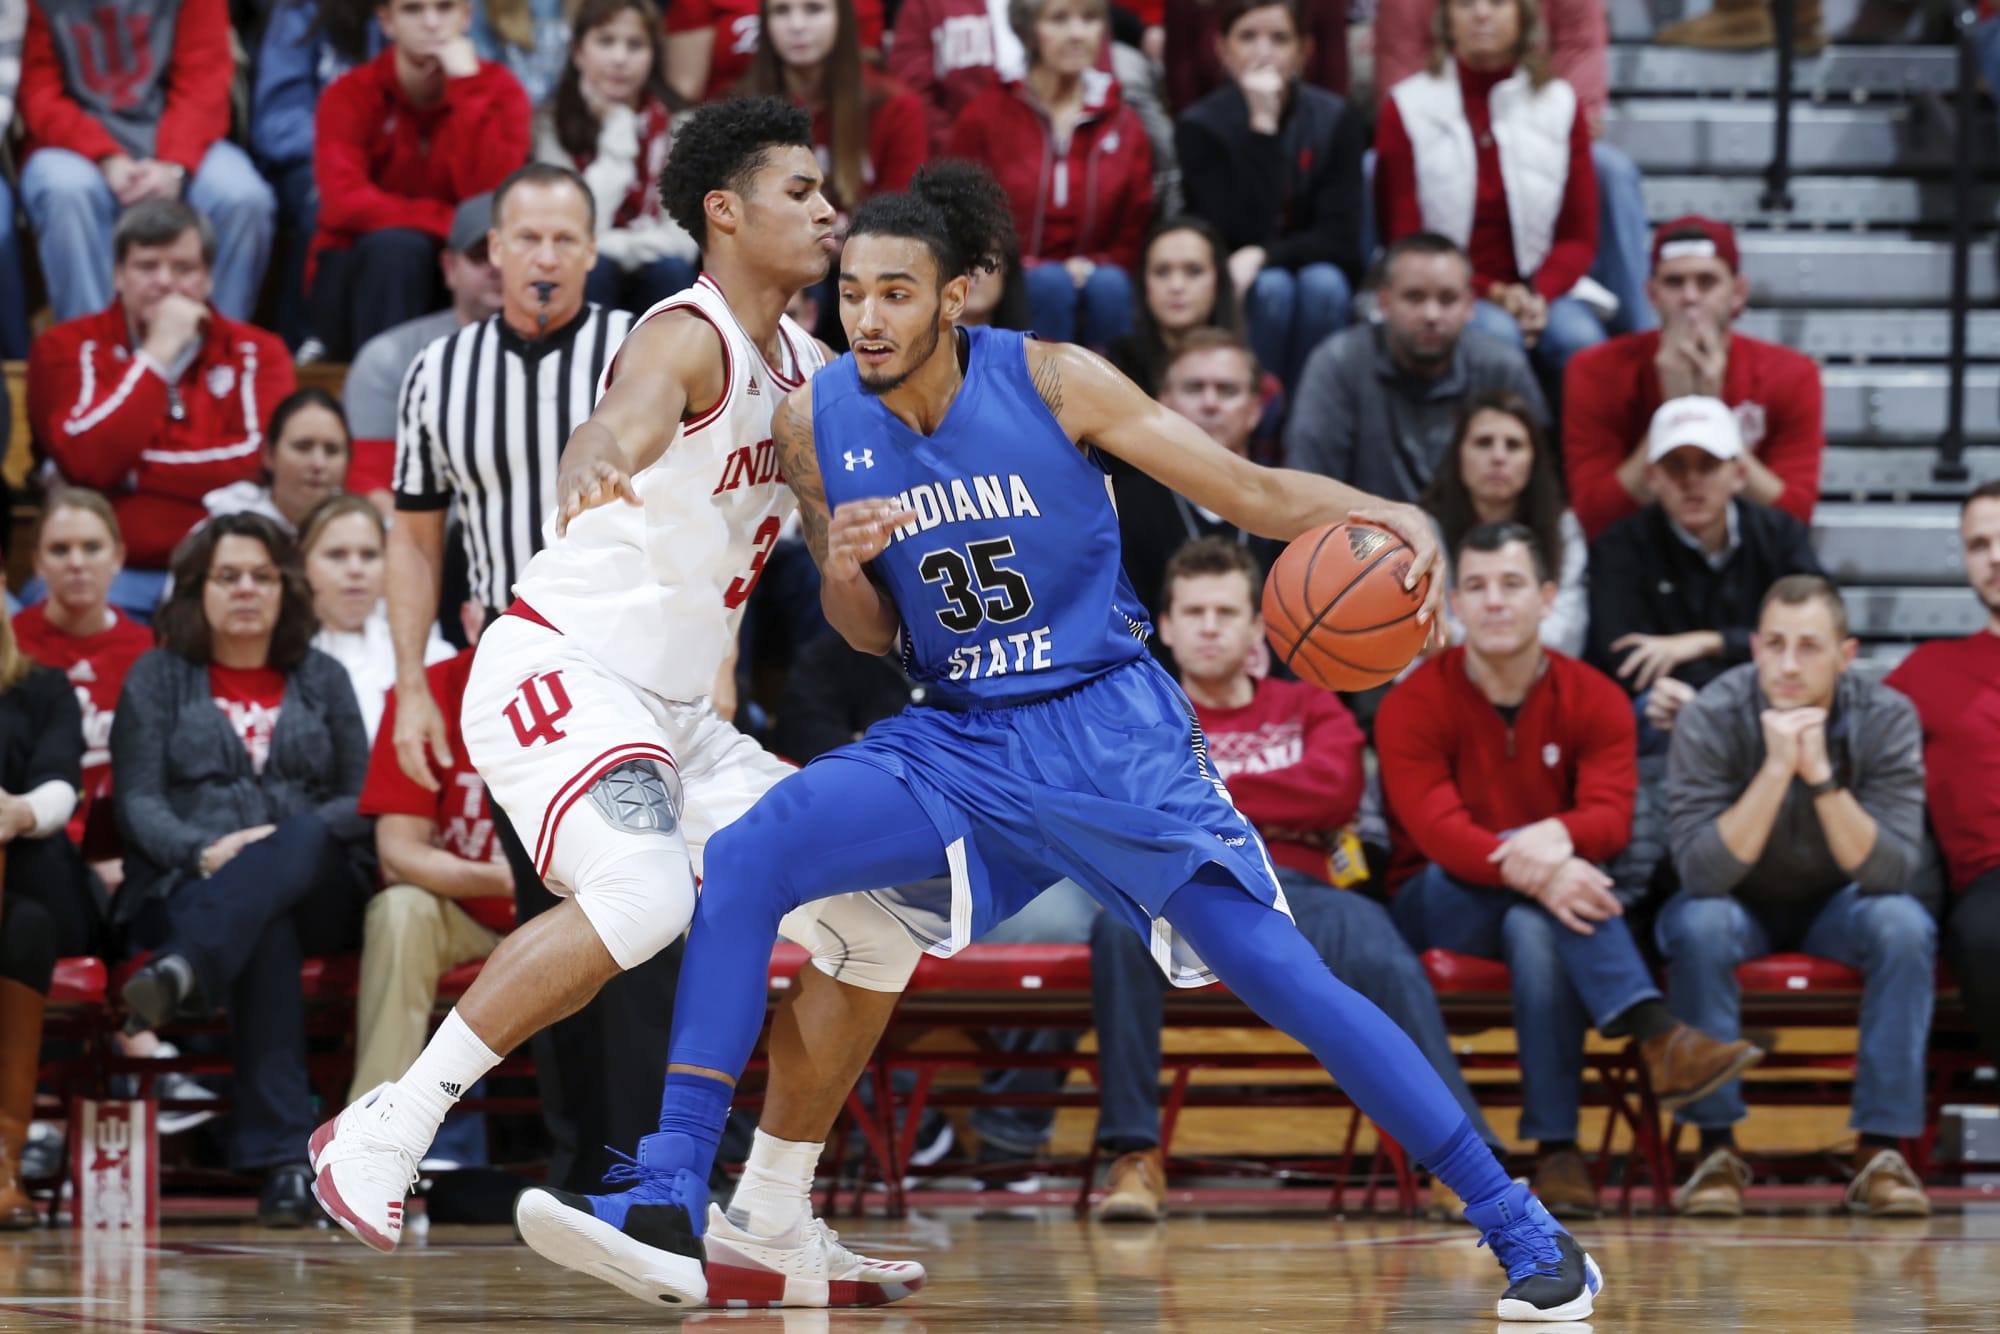 Bradley vs. Indiana State: 2018-19 College basketball game preview, TV